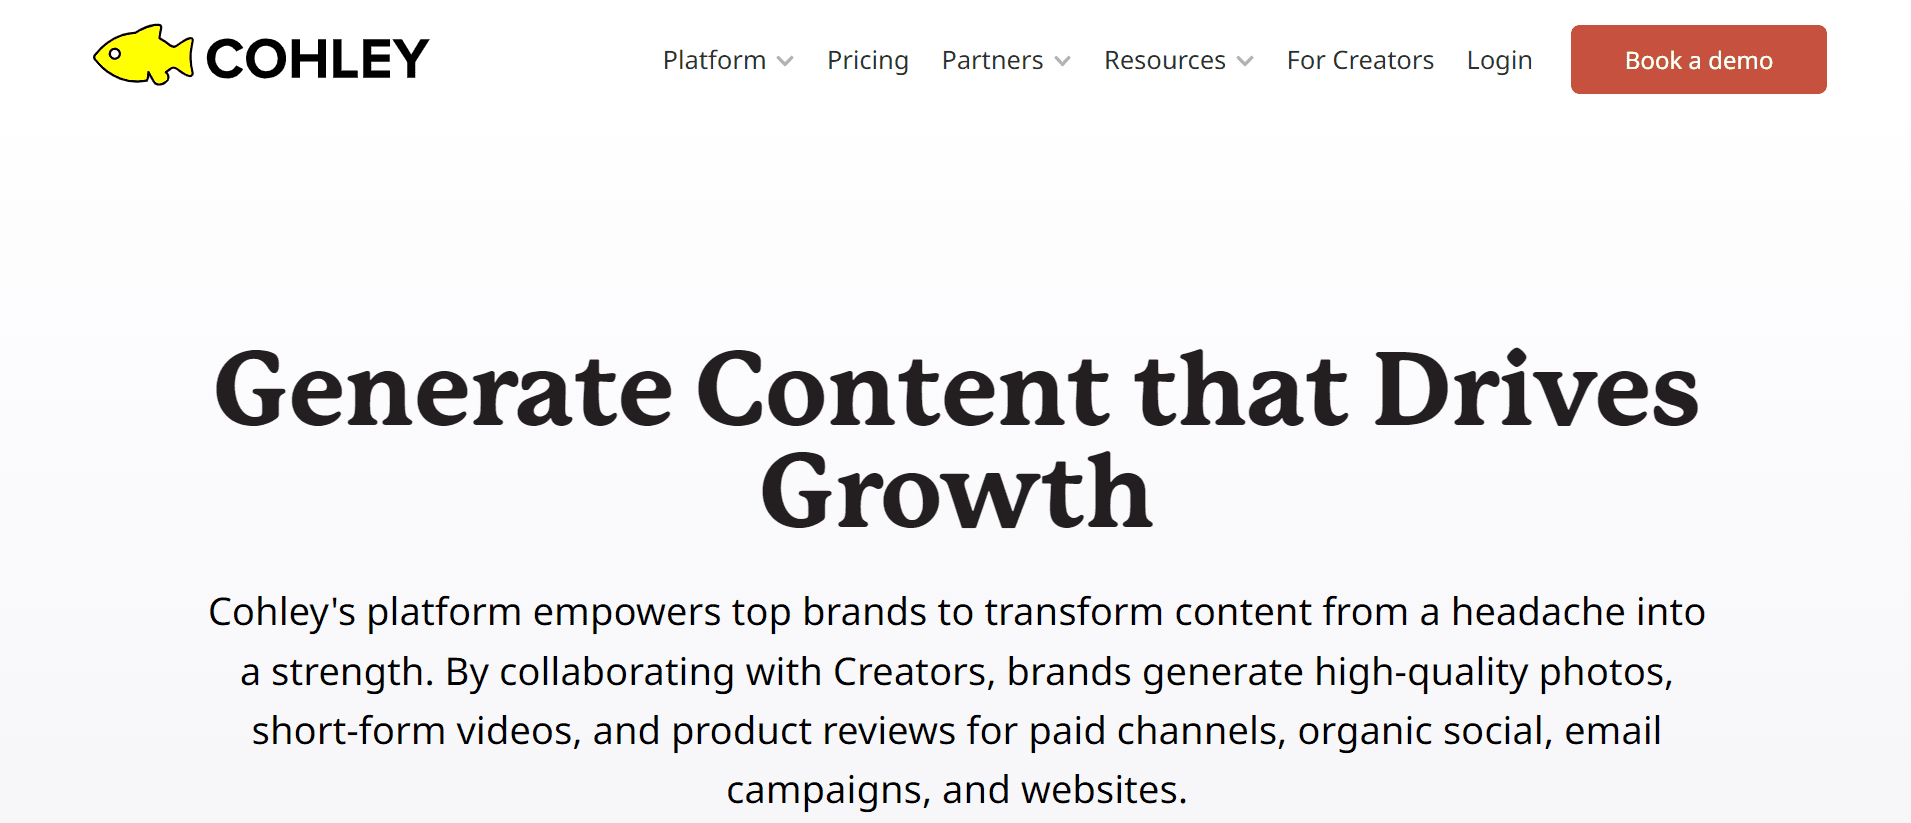 cohley content marketing ugc and text review platform